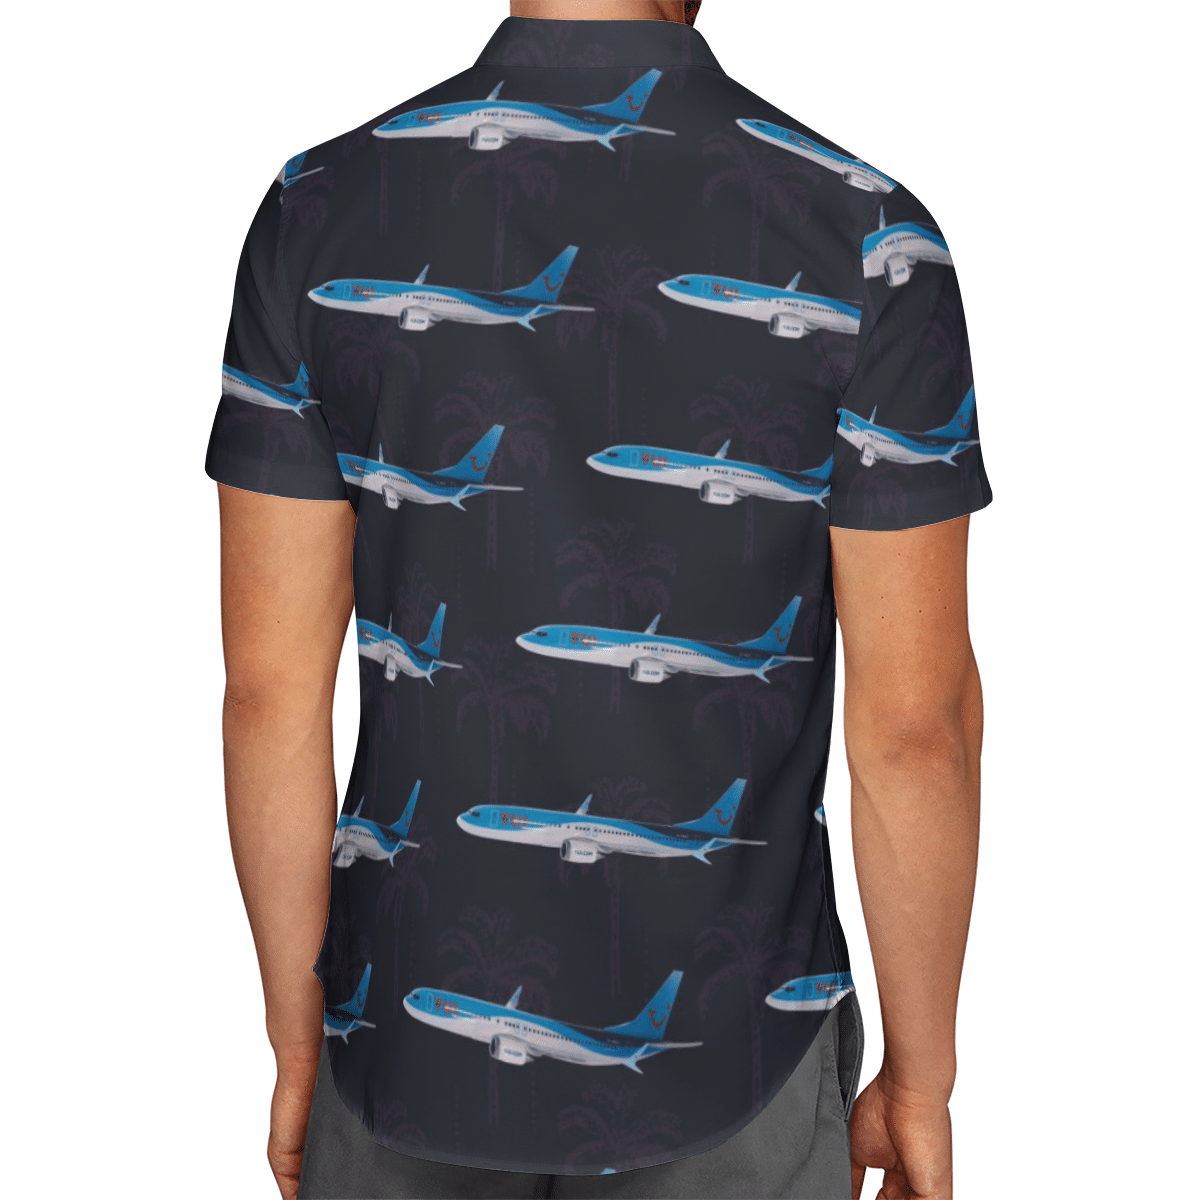 Going to the beach with a quality shirt 162